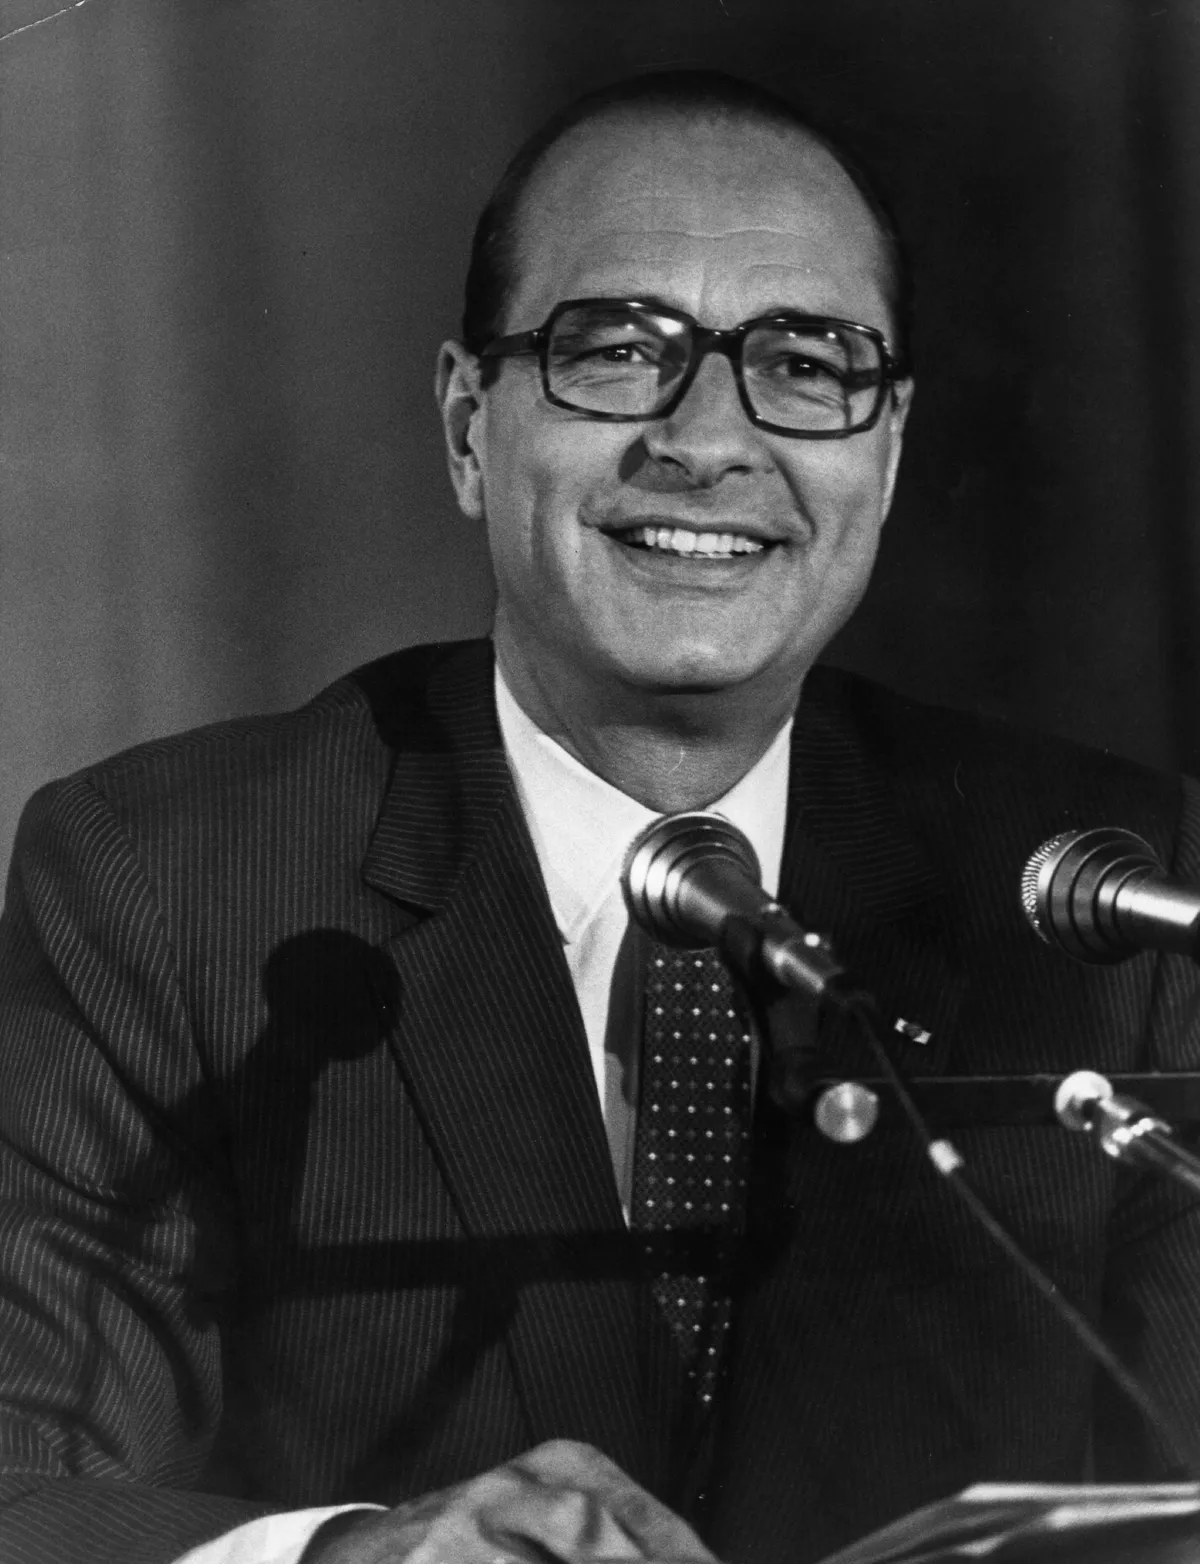 Jacques Chirac | photo : Getty Images